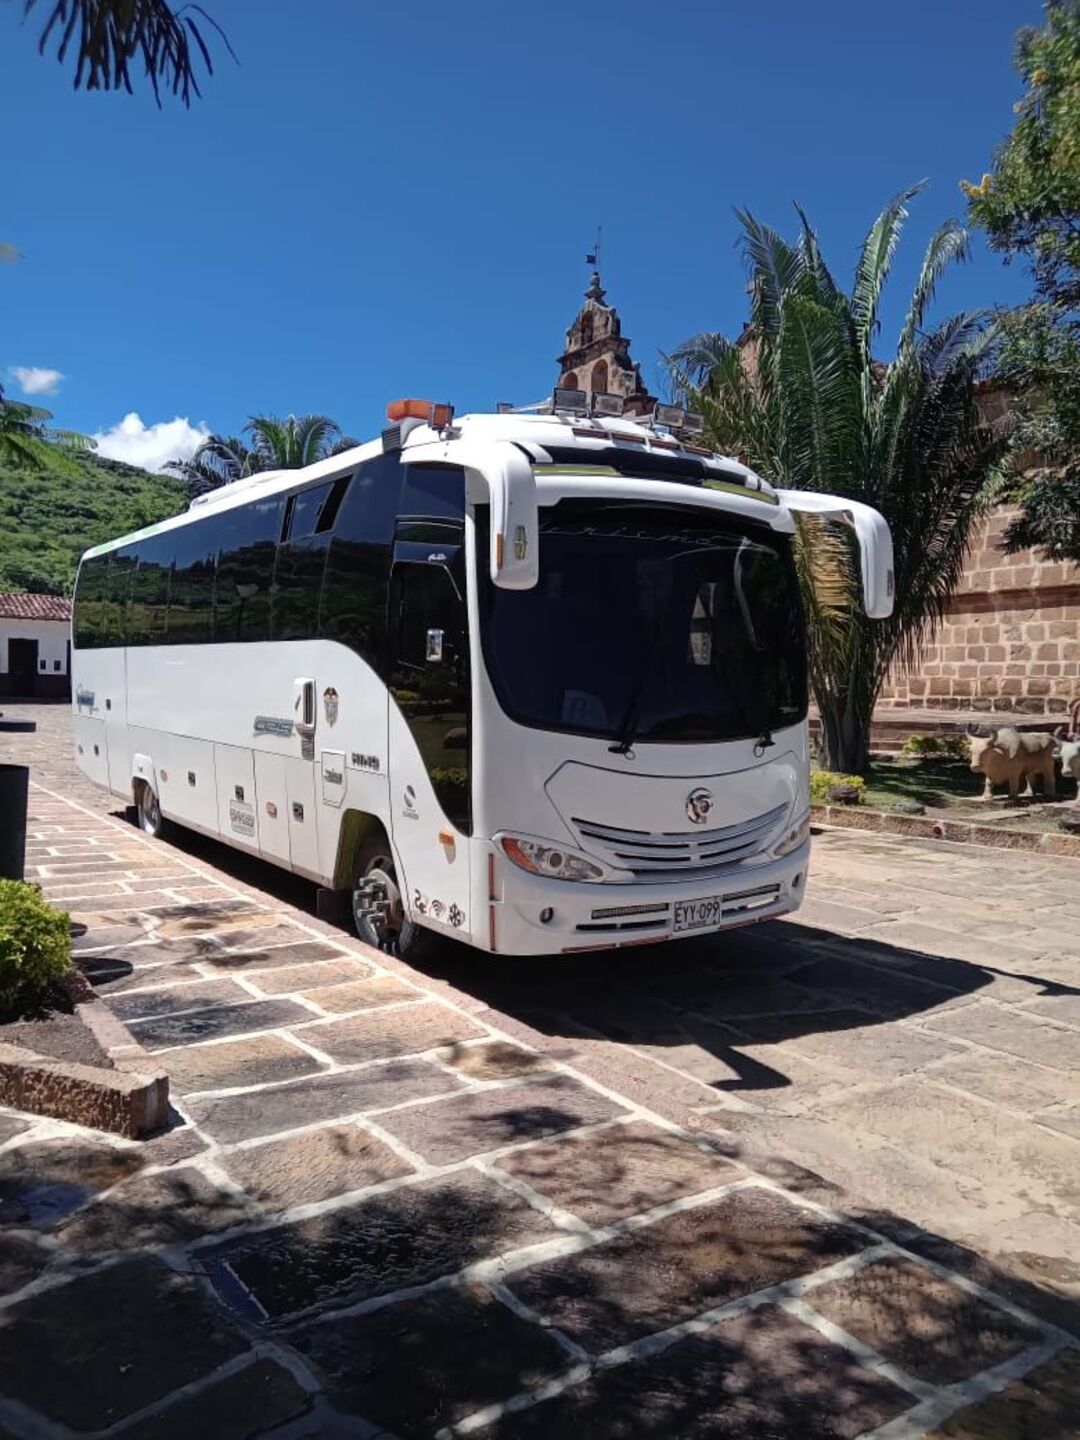 Cartagena to or from Palomino Private Transfer